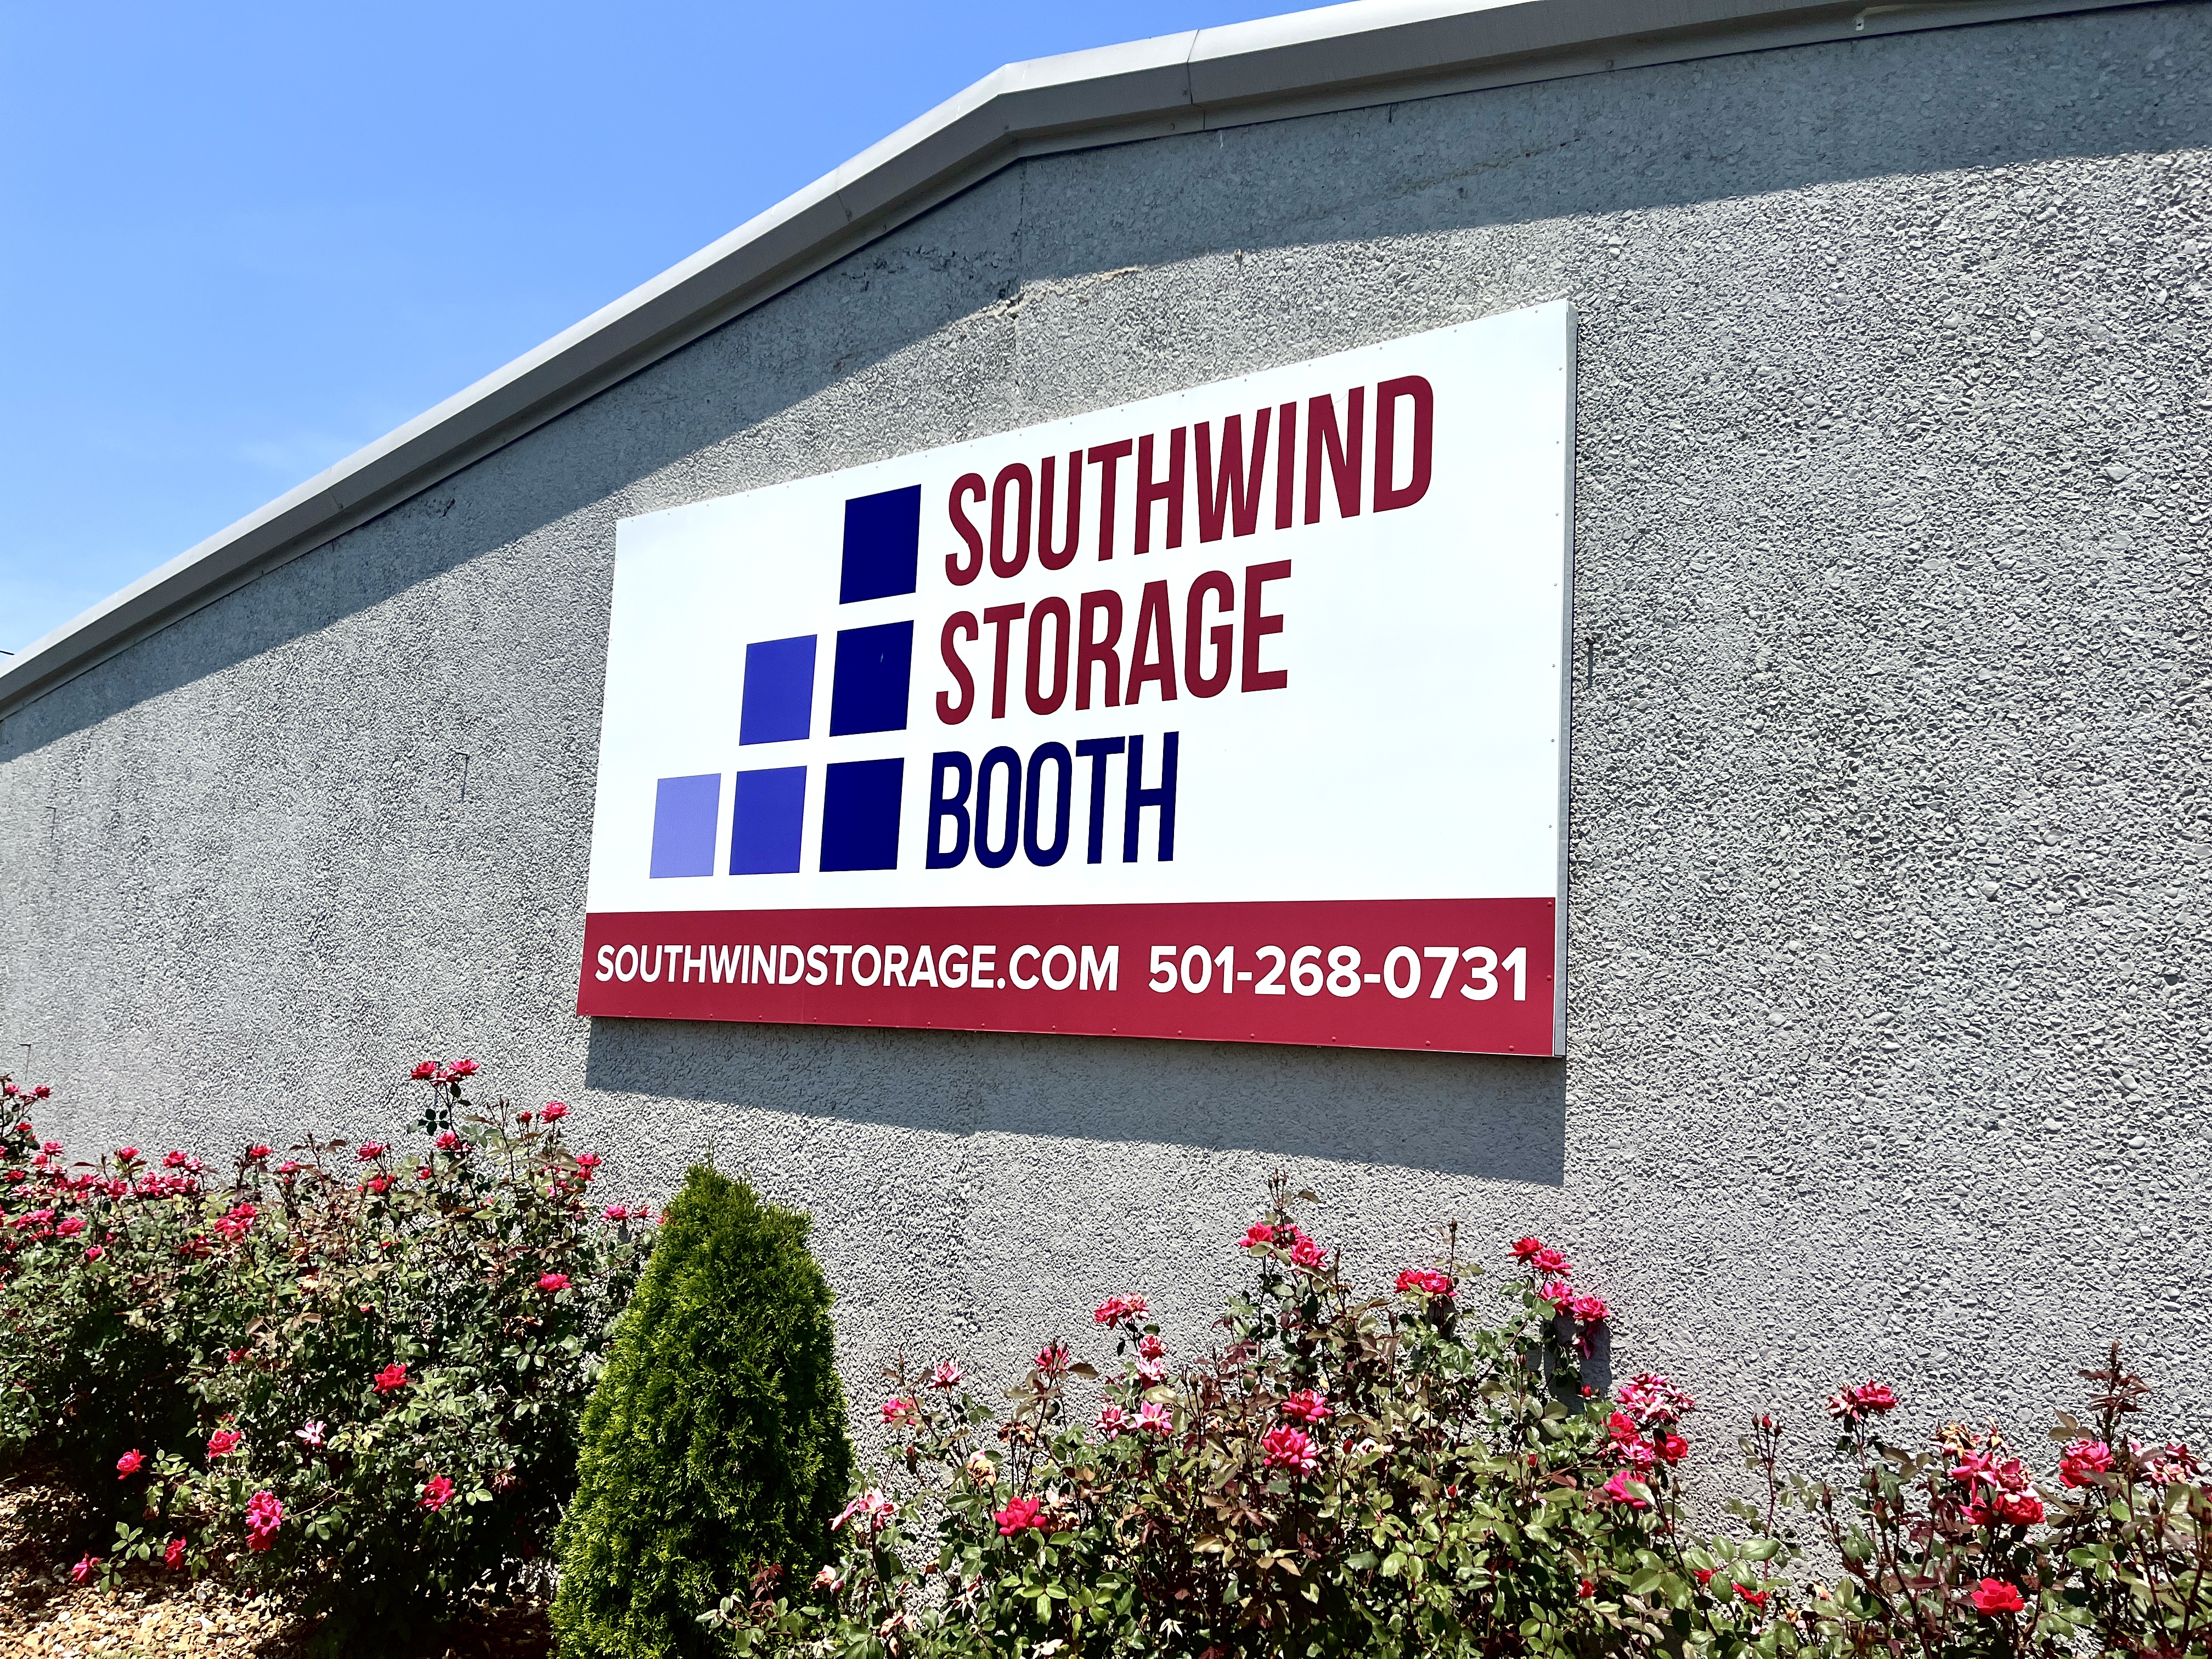 Southwind Storage - Booth